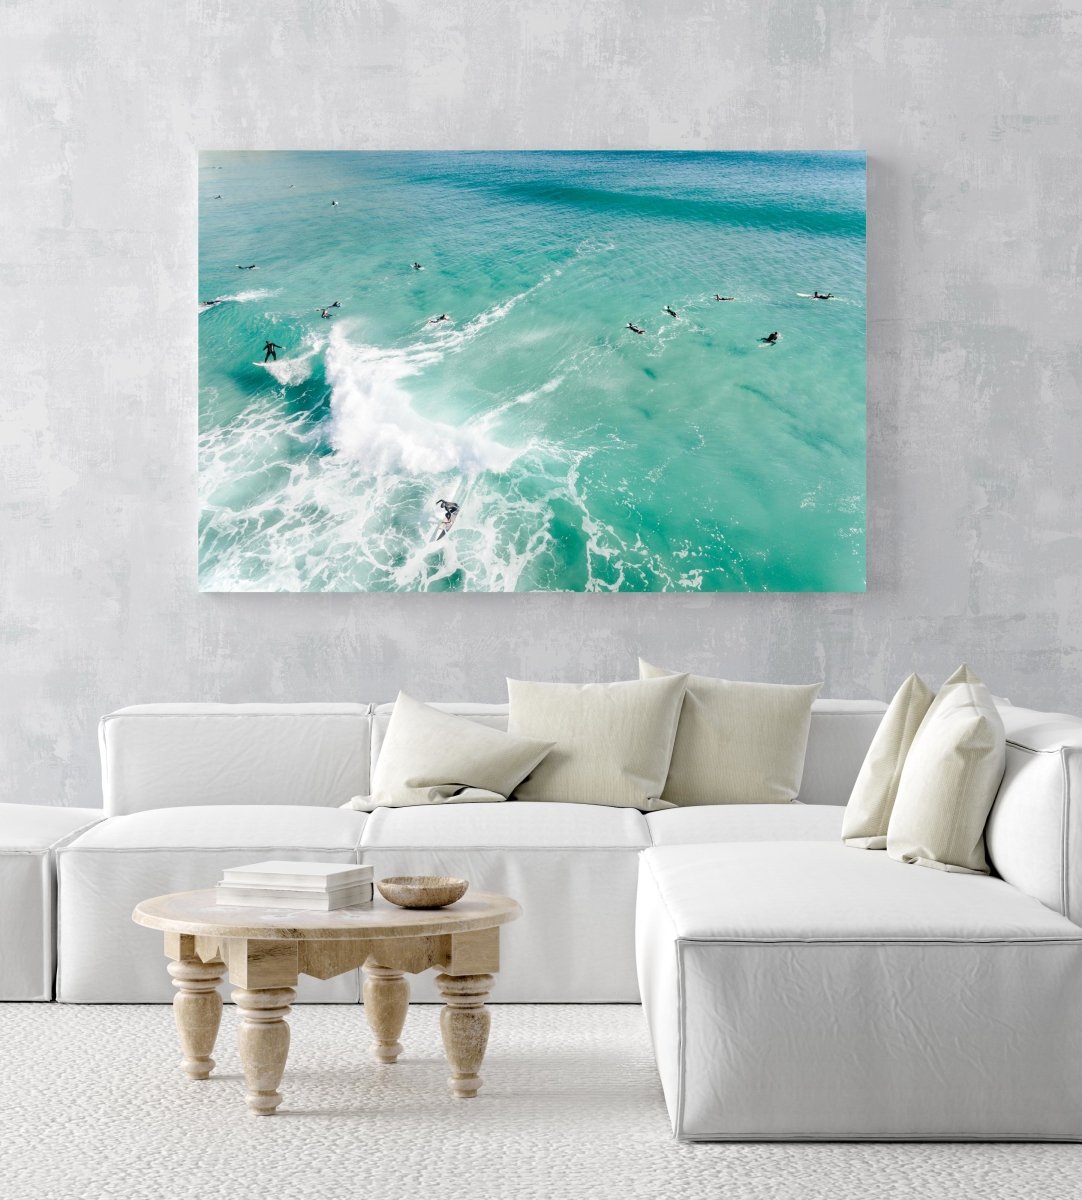 Aerial two surfers on one wave with other surfers paddling around blue swell in Cape Town in an acrylic/perspex frame